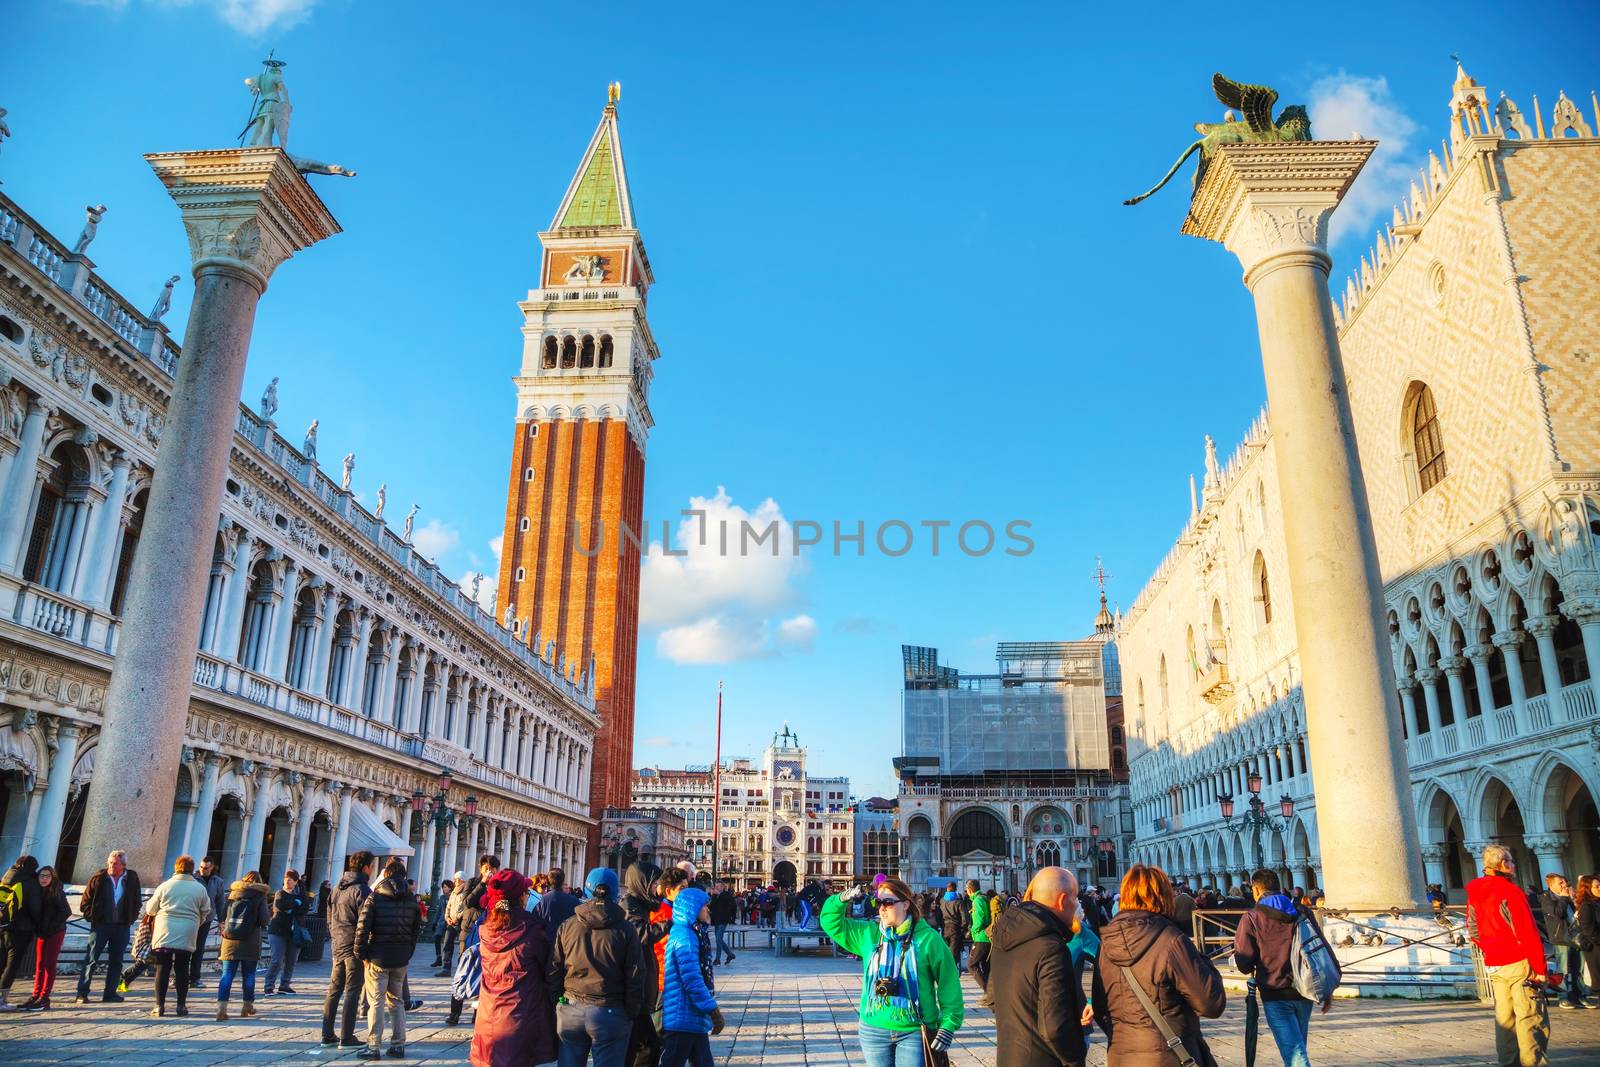 VENICE - NOVEMBER 22: San Marco square with tourists on November 22, 2015 in Venice, Italy. It's the principal public square of Venice, Italy, where it is generally known just as the Piazza.